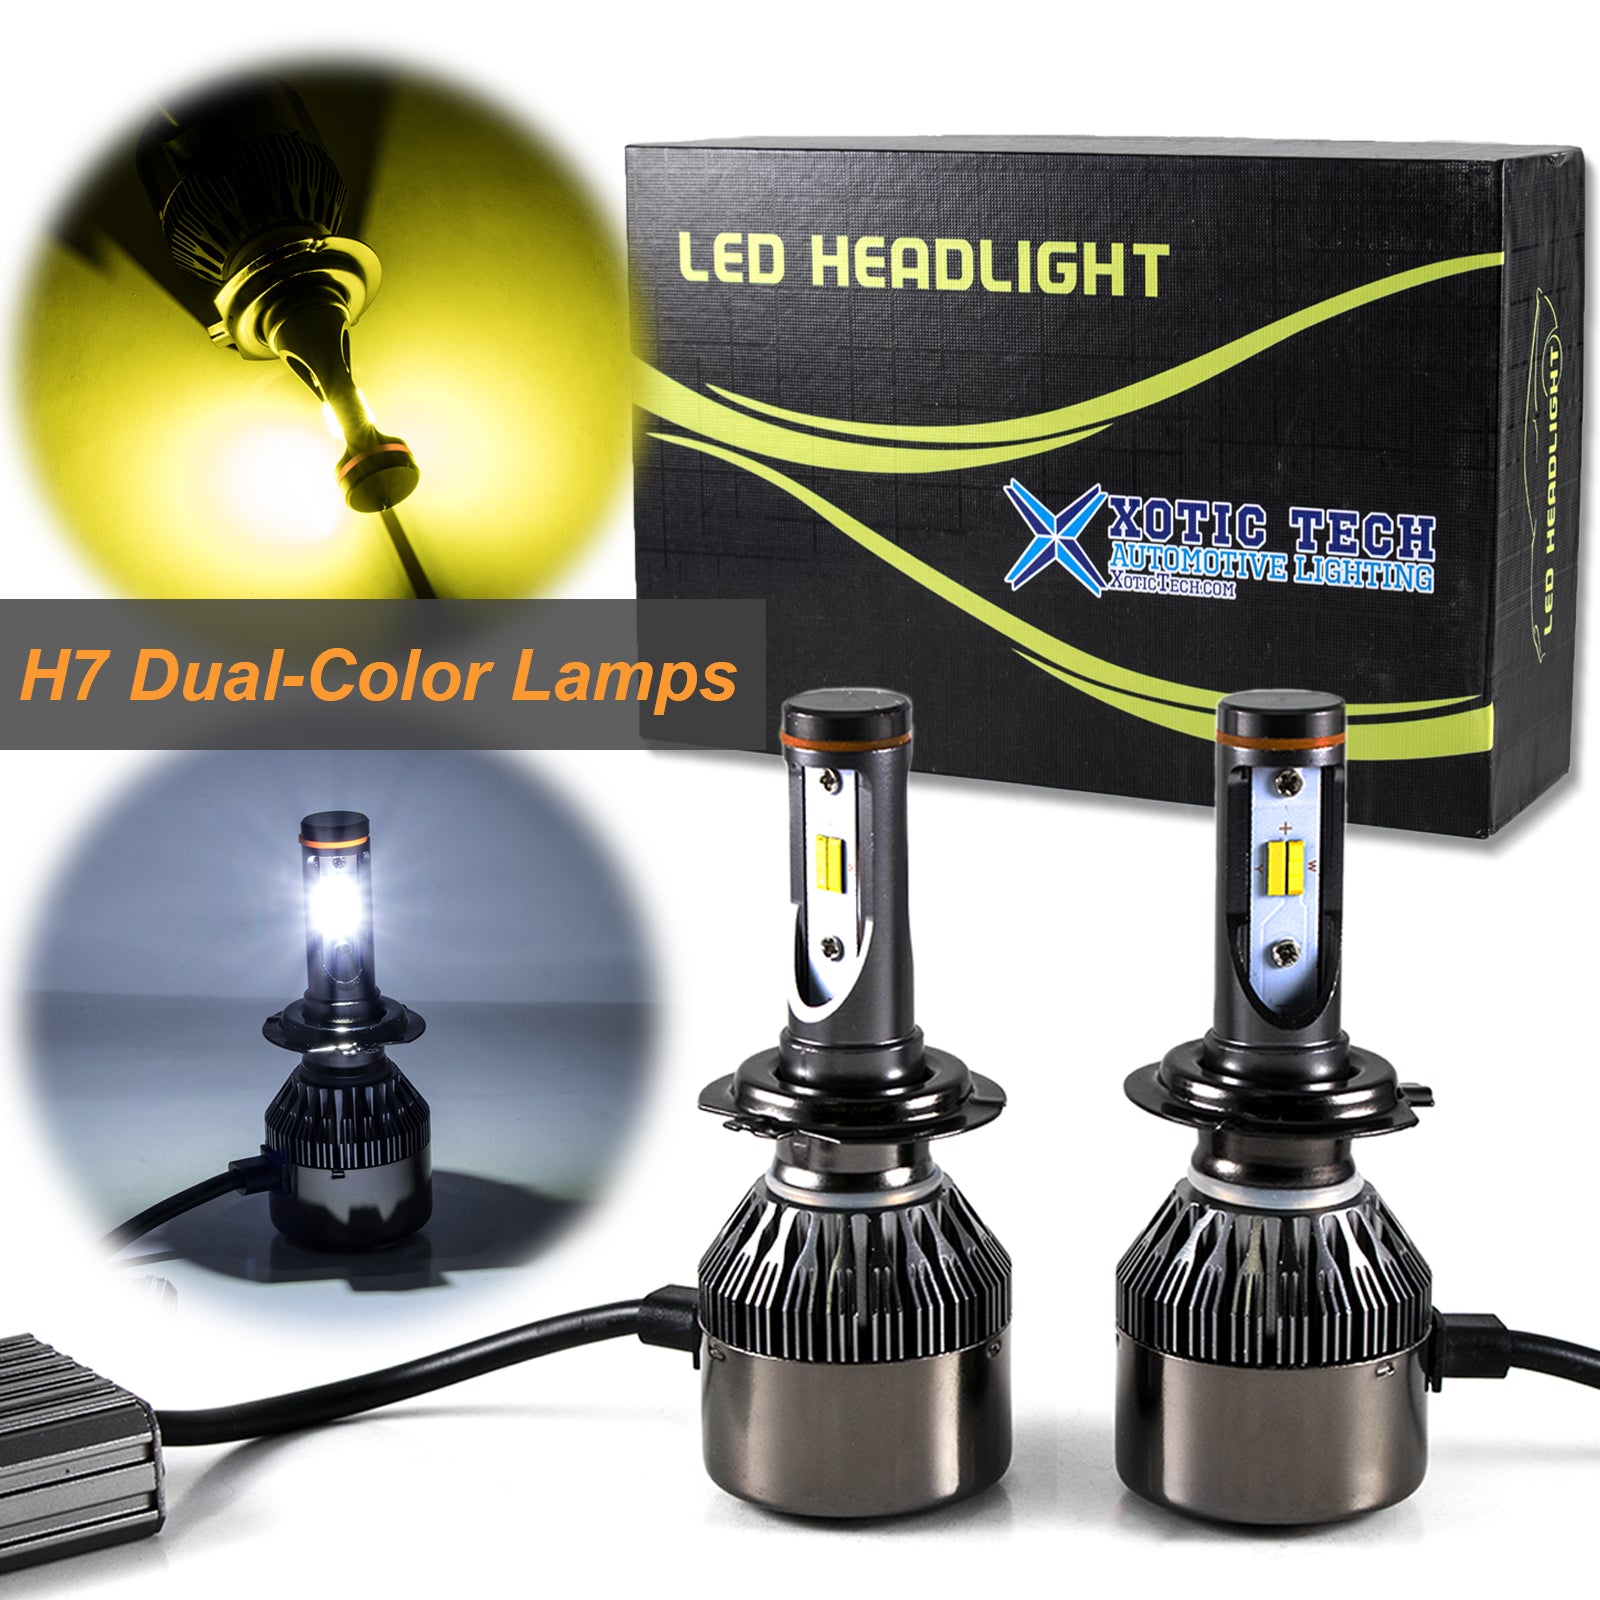 H7 Dual-Color 3000K/6000K HID matching xenon white /yellow LED Headlig